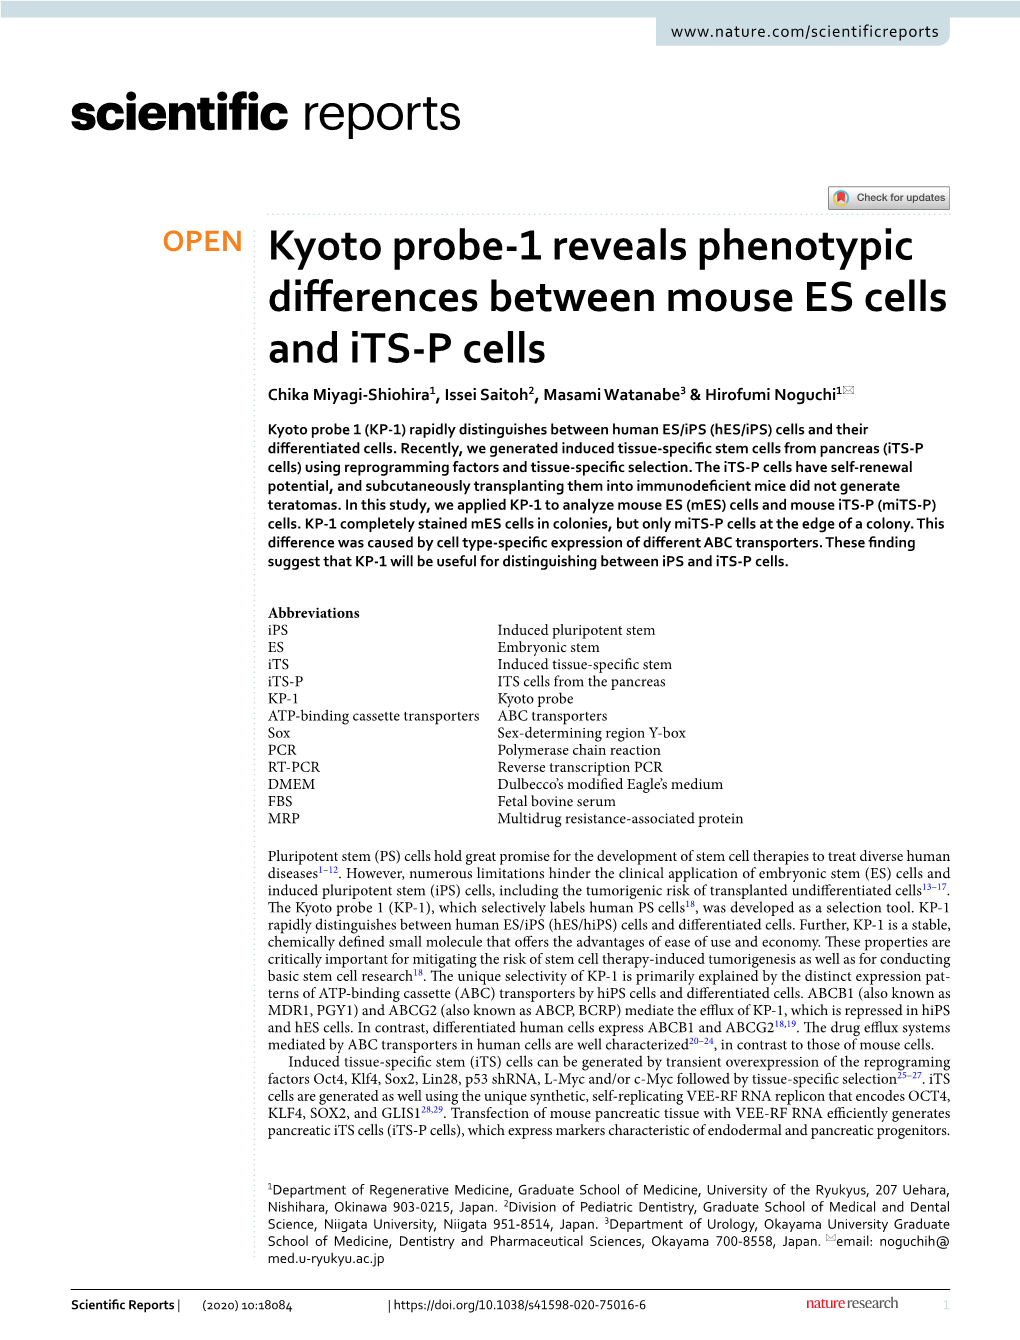 Kyoto Probe-1 Reveals Phenotypic Differences Between Mouse ES